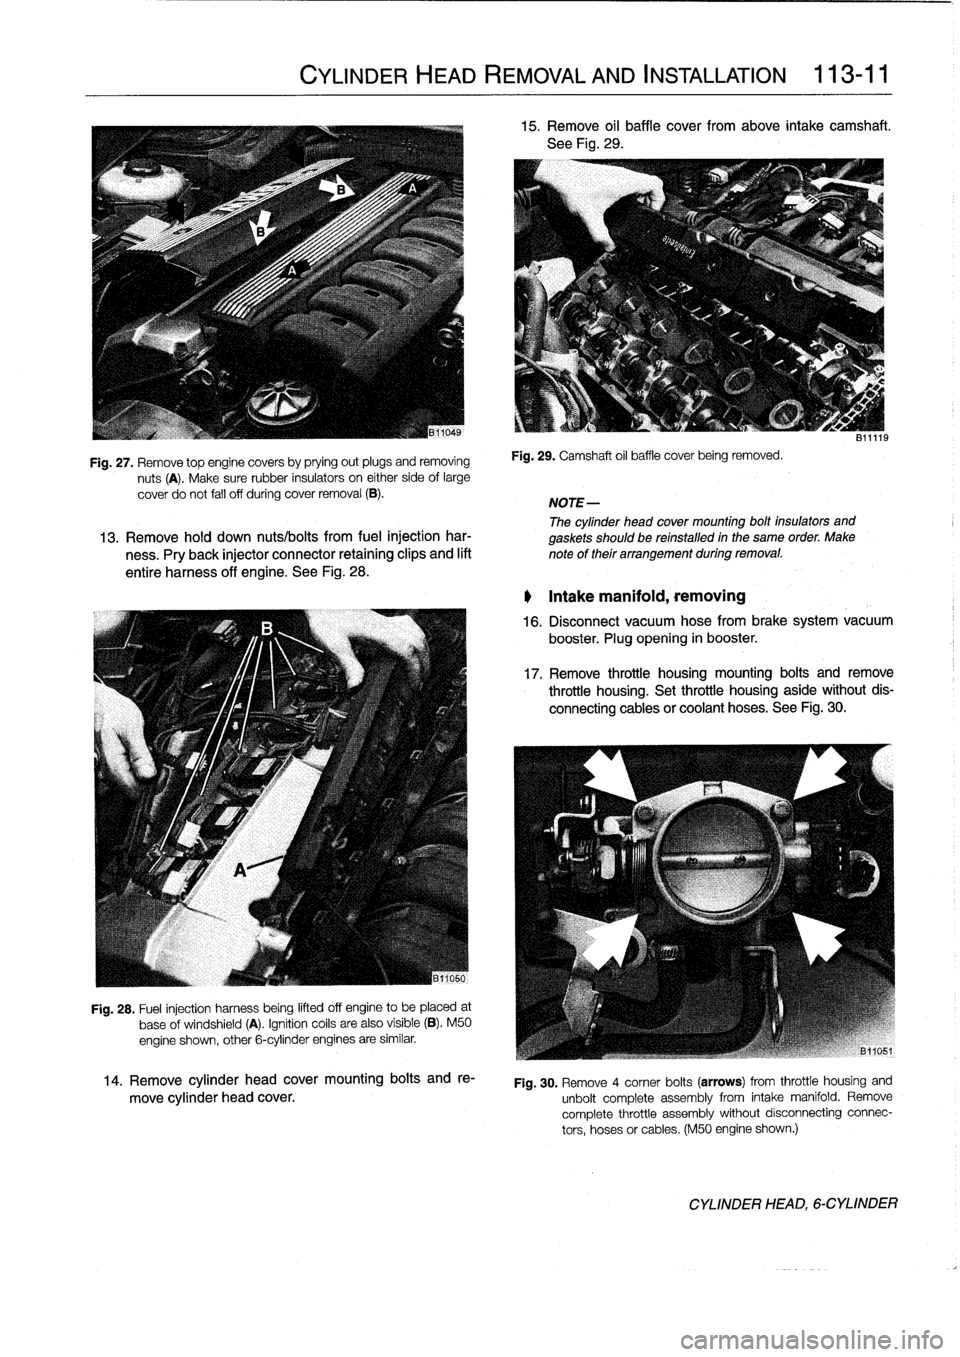 BMW 323i 1997 E36 Repair Manual 
Fig
.
27
.
Remove
top
enginecovers
by
prying
out
plugs
and
removing

nuts
(A)
.
Make
sure
rubber
insulators
on
either
side
of
large

cover
do
not
fall
off
during
cover
removal
(B)
.

Fig
.
28
.
Fuel
